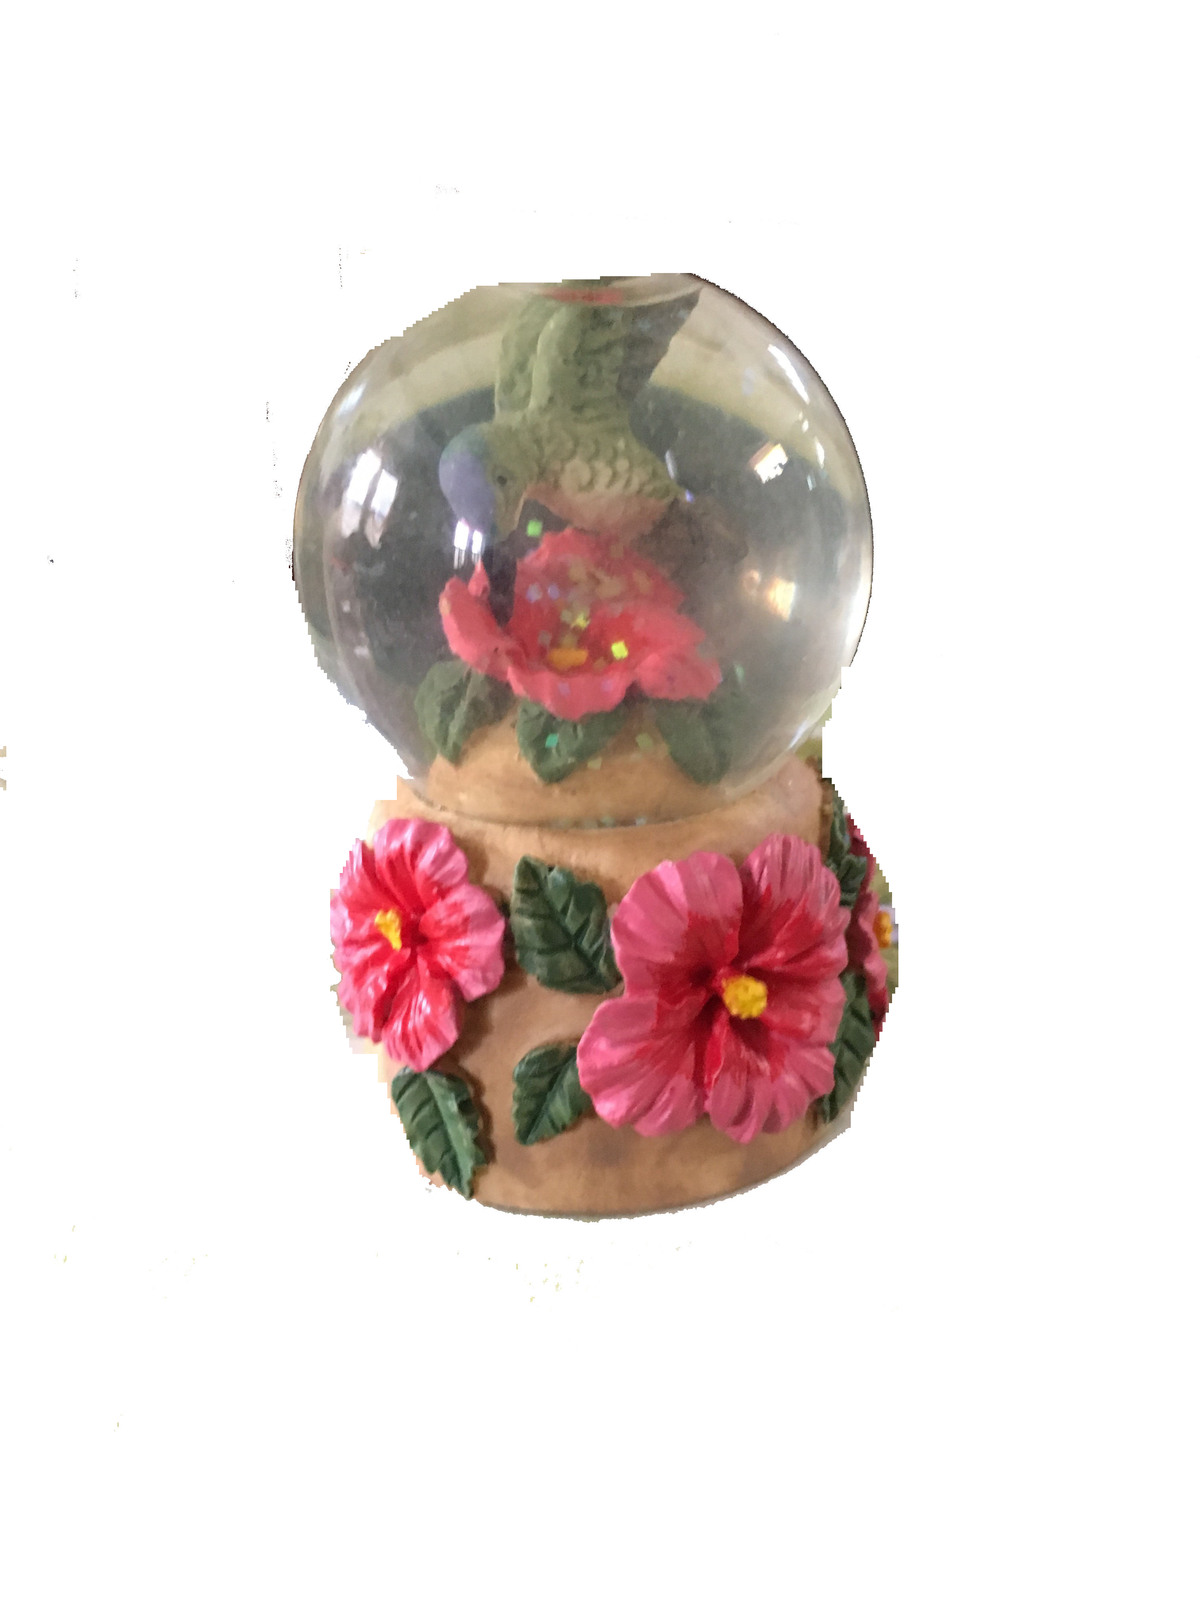 DECORATIVE GLASS GLOBE FILLED WITH WATER AND ROSES - $14.95